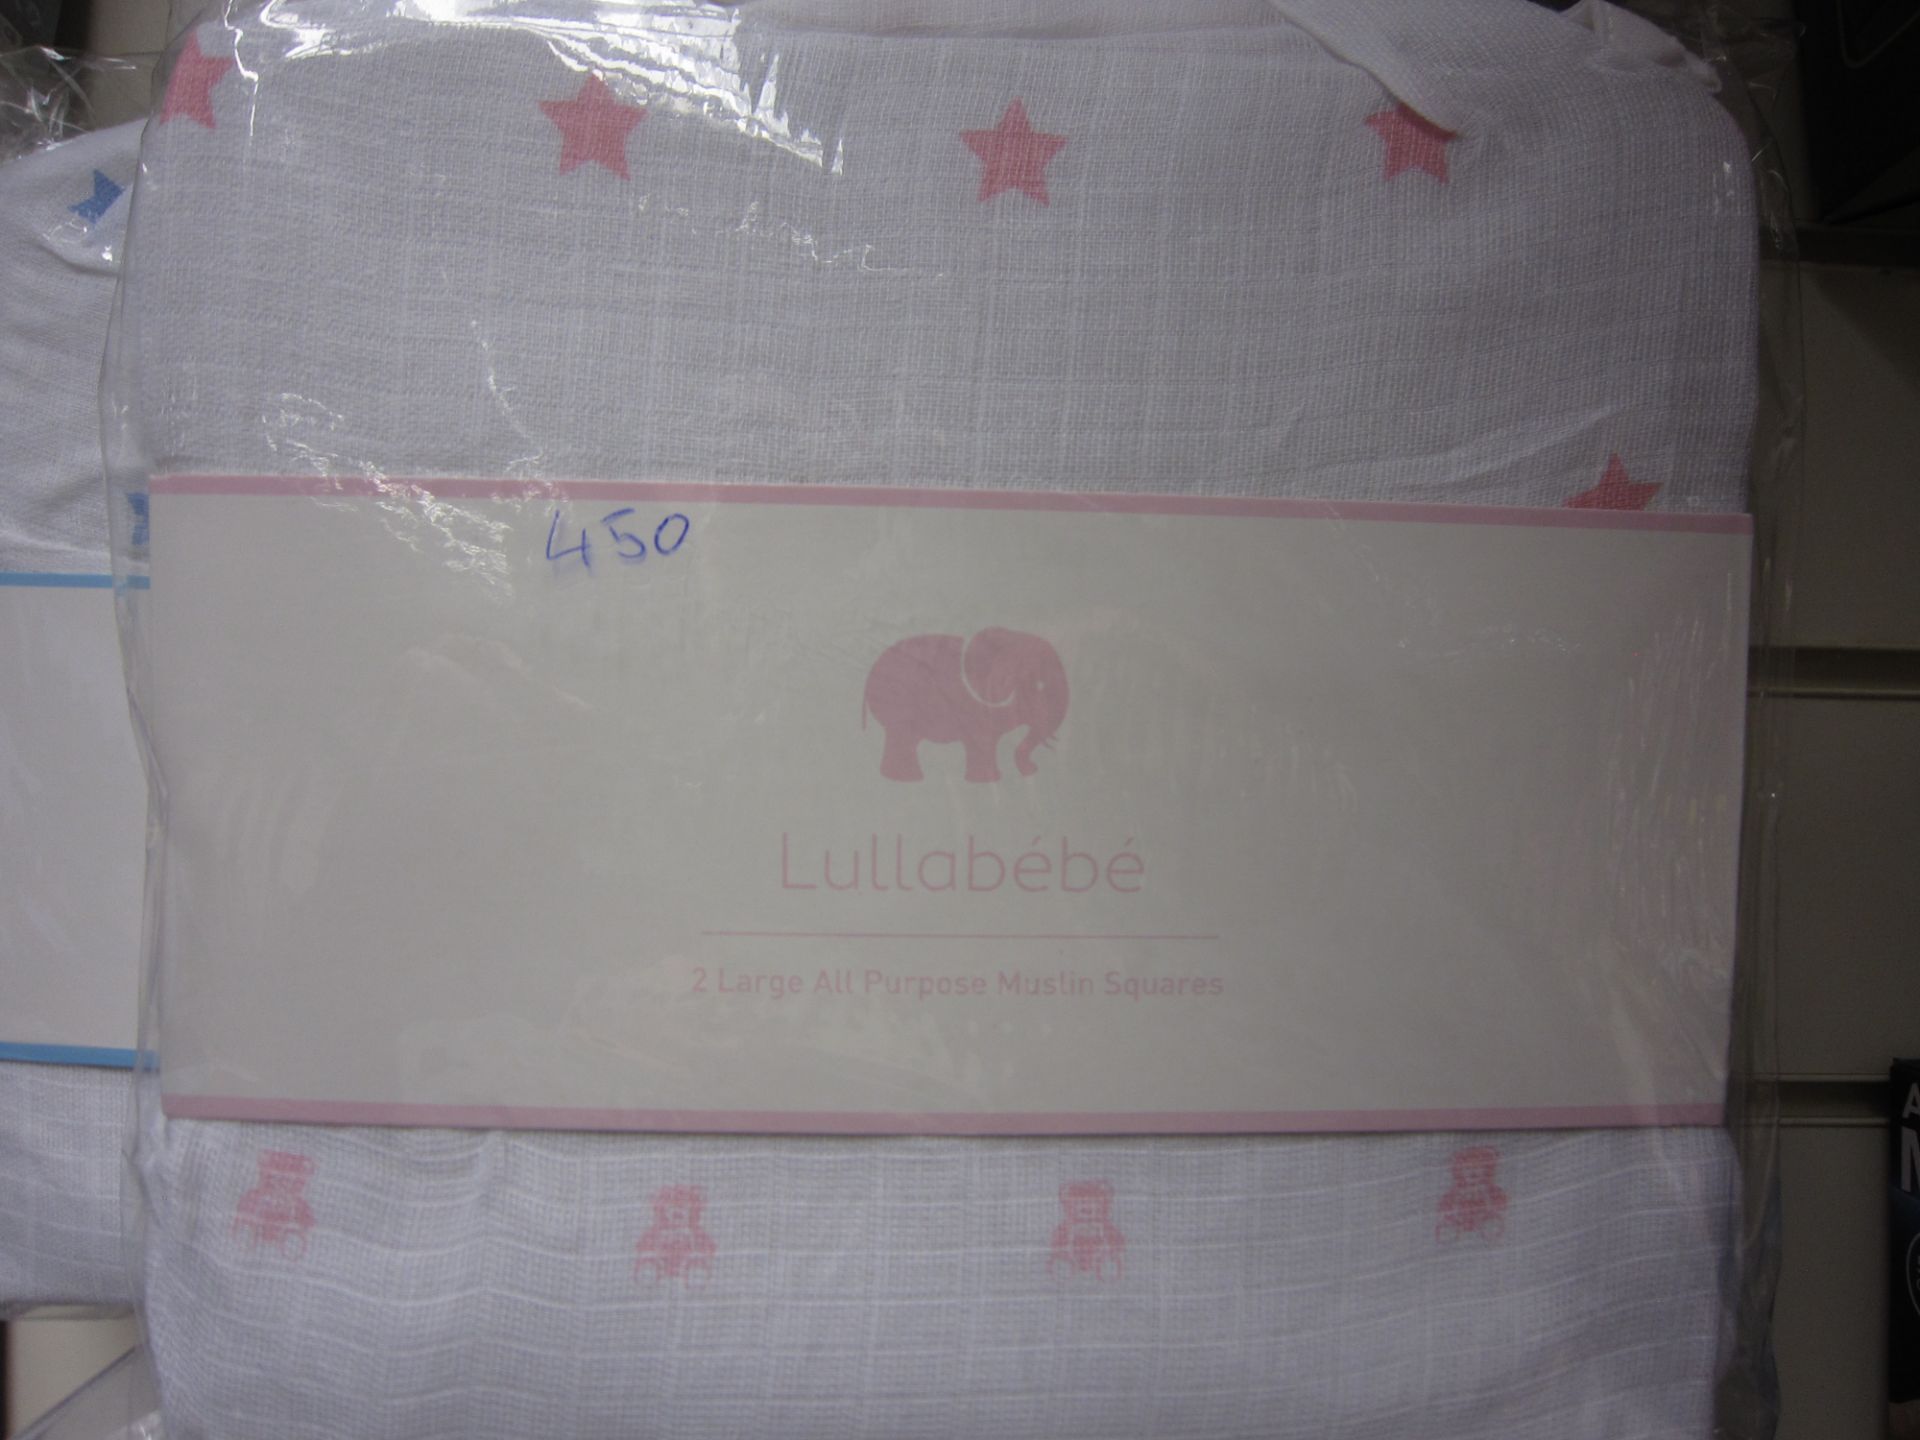 100Pcs Assorted Blue and Pink Brand New Large Size Baby Swaddle Blankets - Brand Is Bebe - Large...